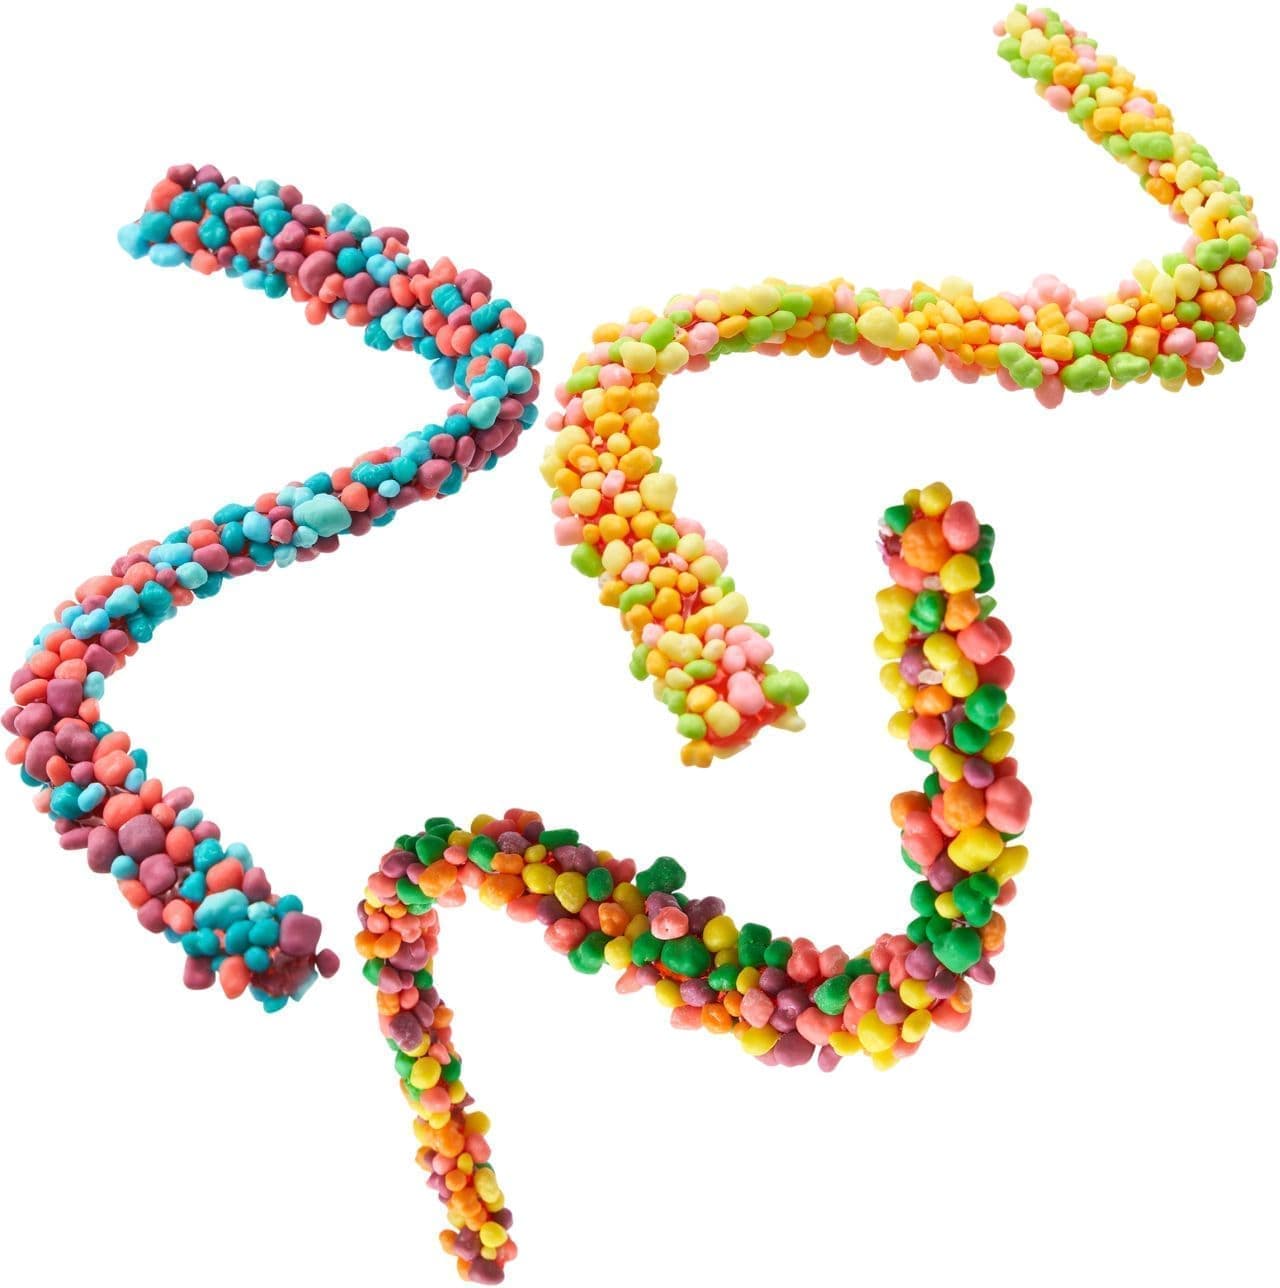 Rope-shaped gummy candy "NERDS rope"